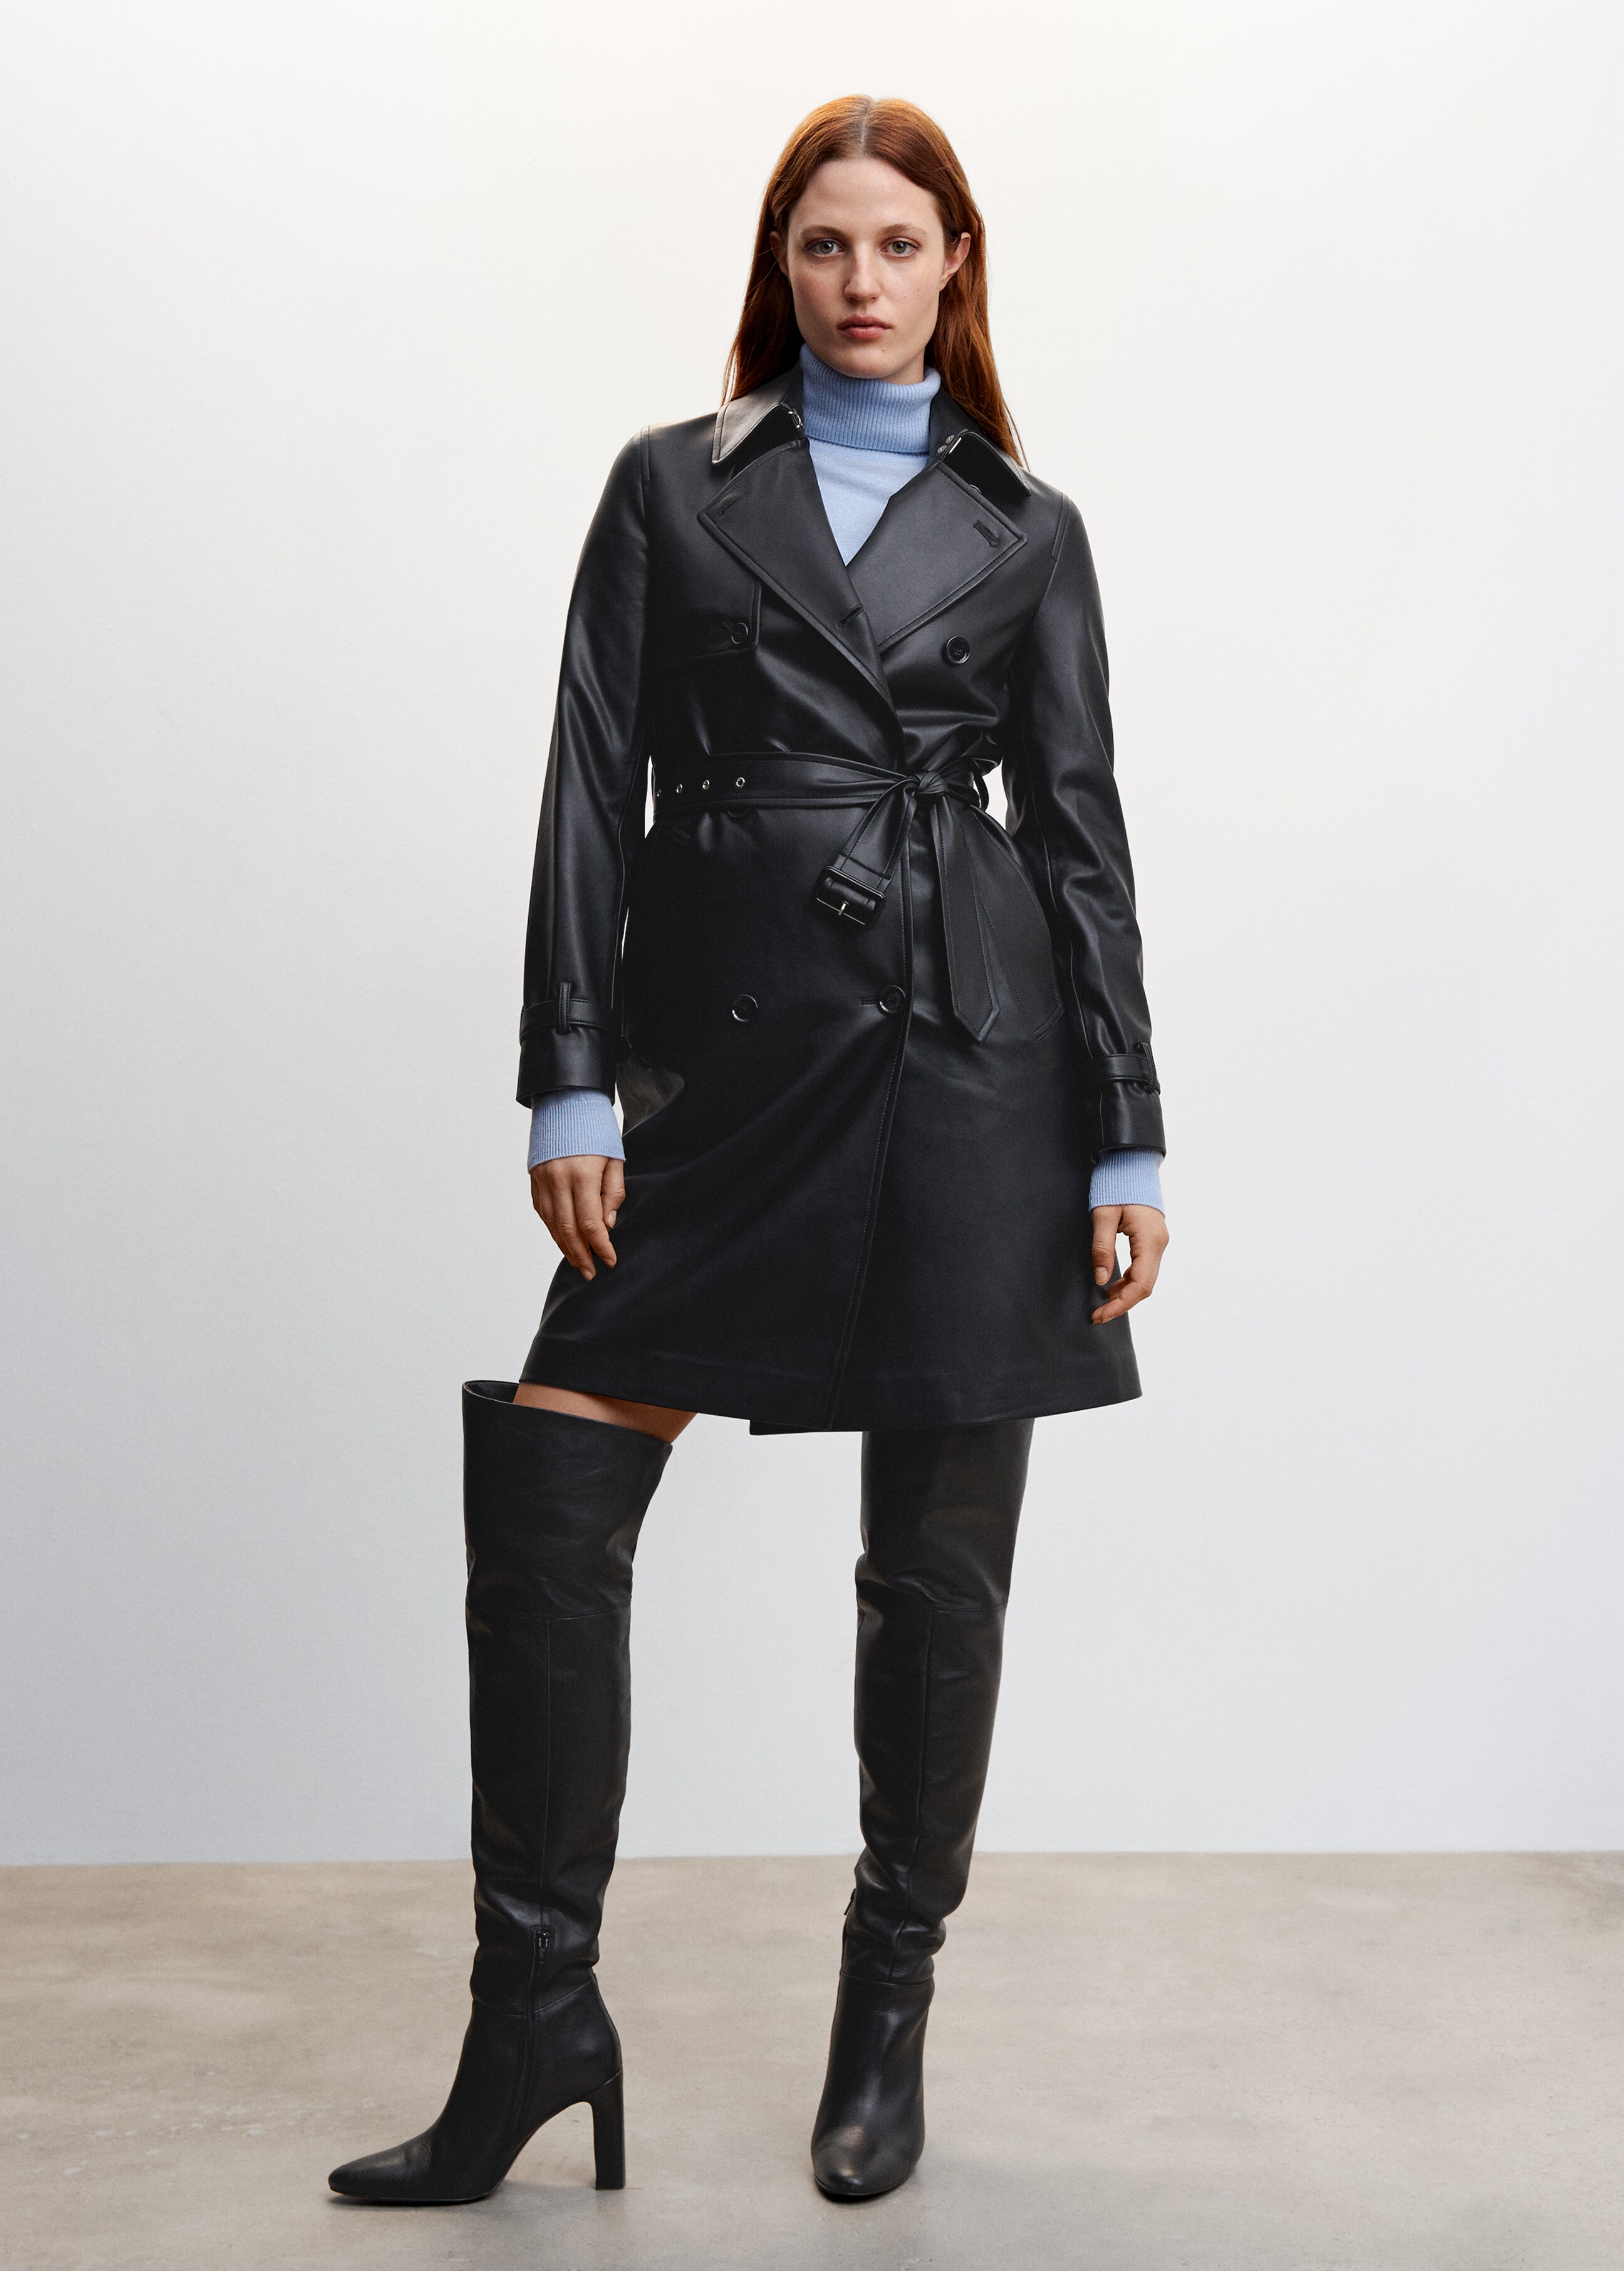 Leather-effect trench coat - General plane